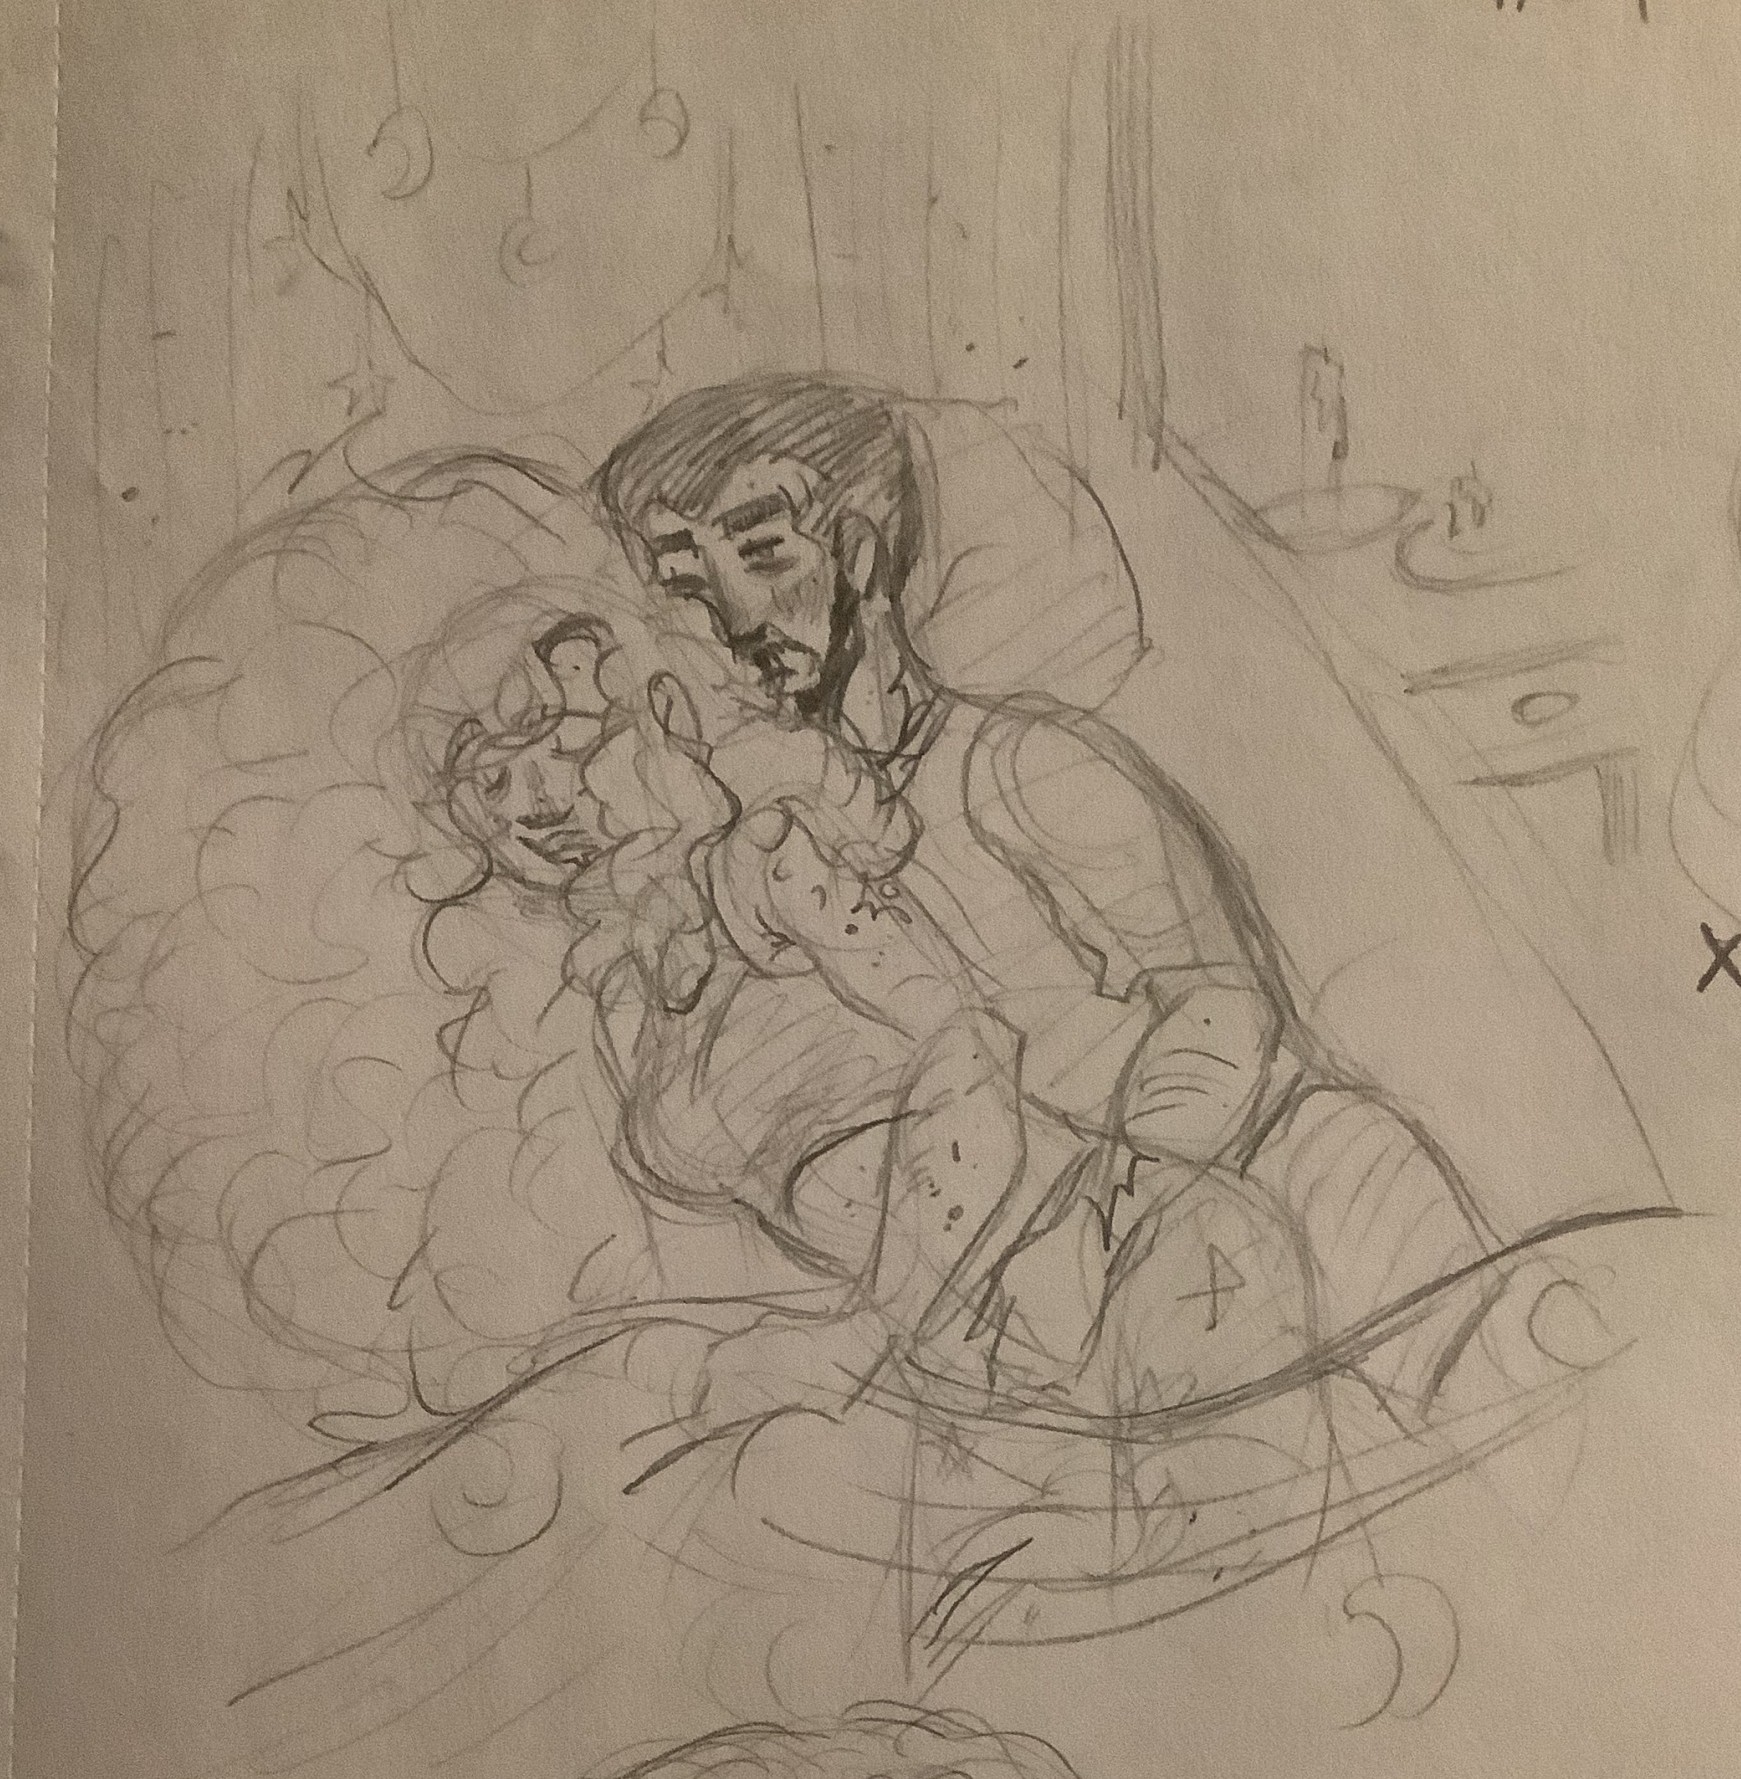 Martin GreyWhinder and Mari Faucher Sleep Together (Harmony and Horror)